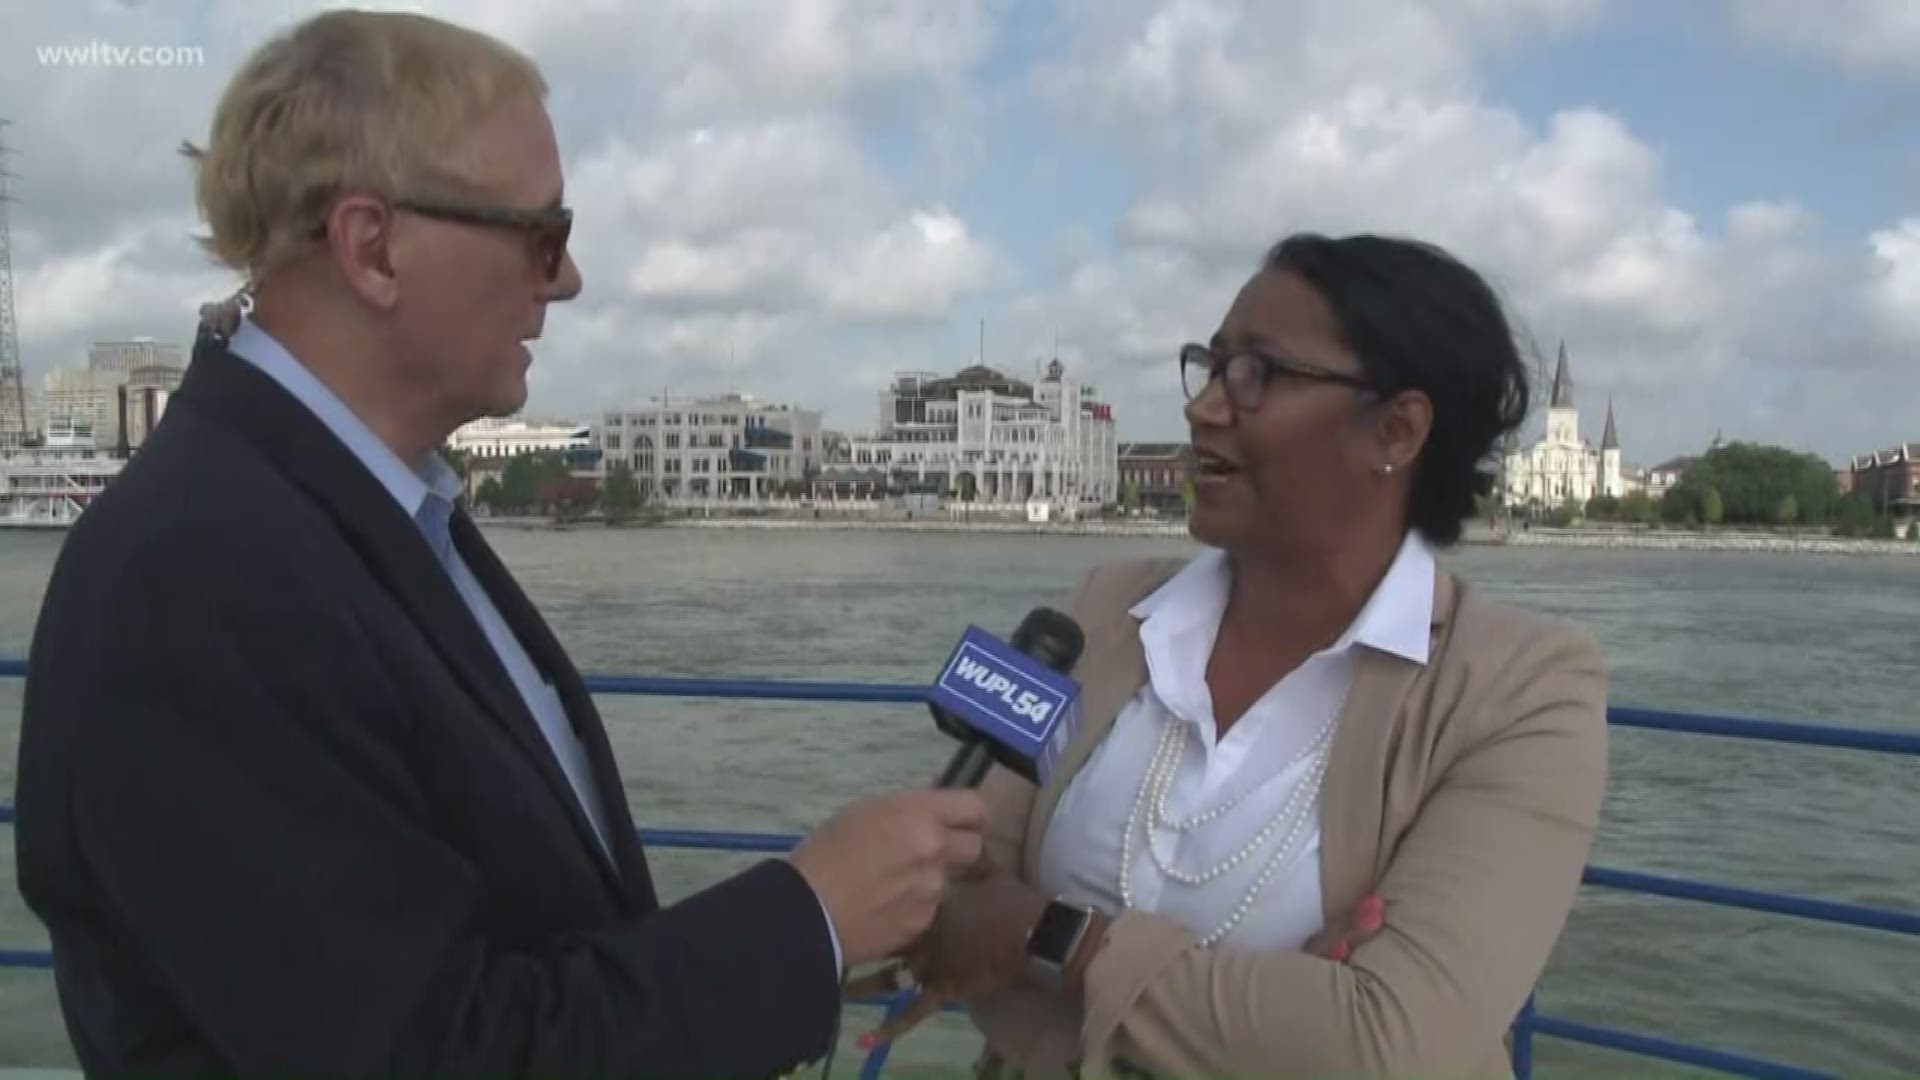 Eric Paulsen reports from the Mississippi River and interviews Tiffany Carter, Port of New Orleans Director of Procurement, about the economic impact for the port, particularly for small and local businesses.